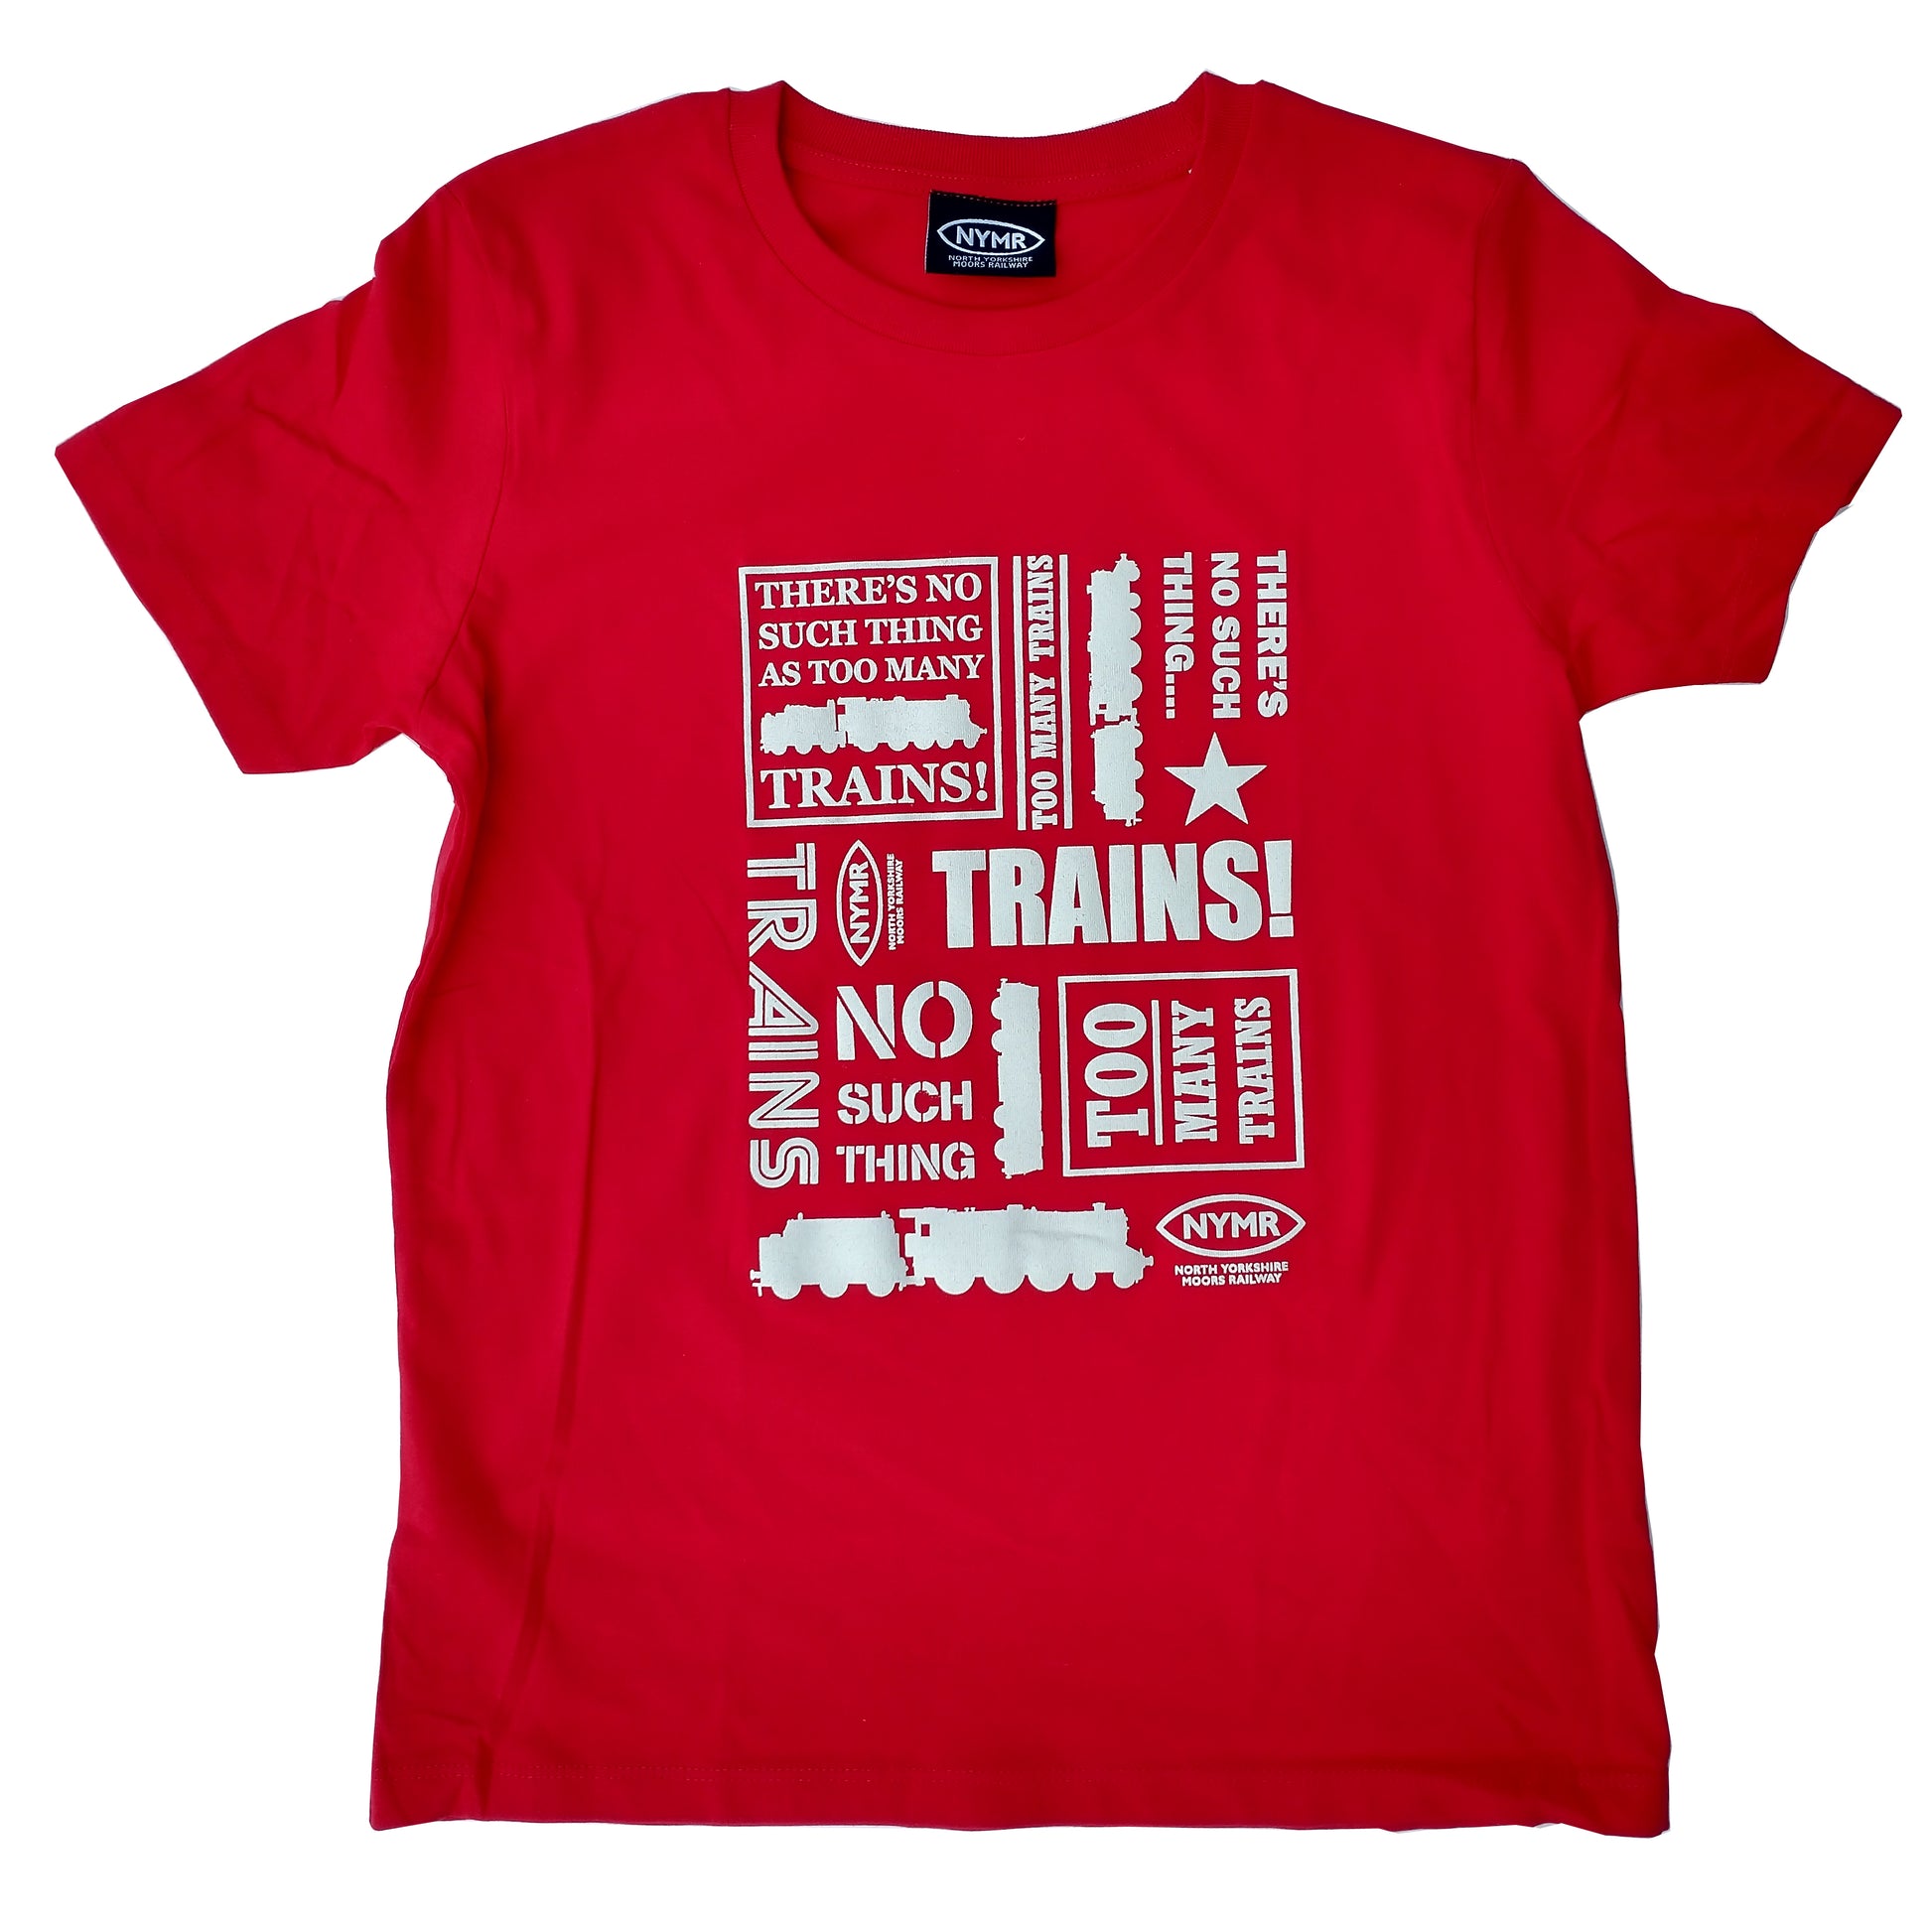 Red T shirt with there's no such thing as too many trains design printed in white on front.